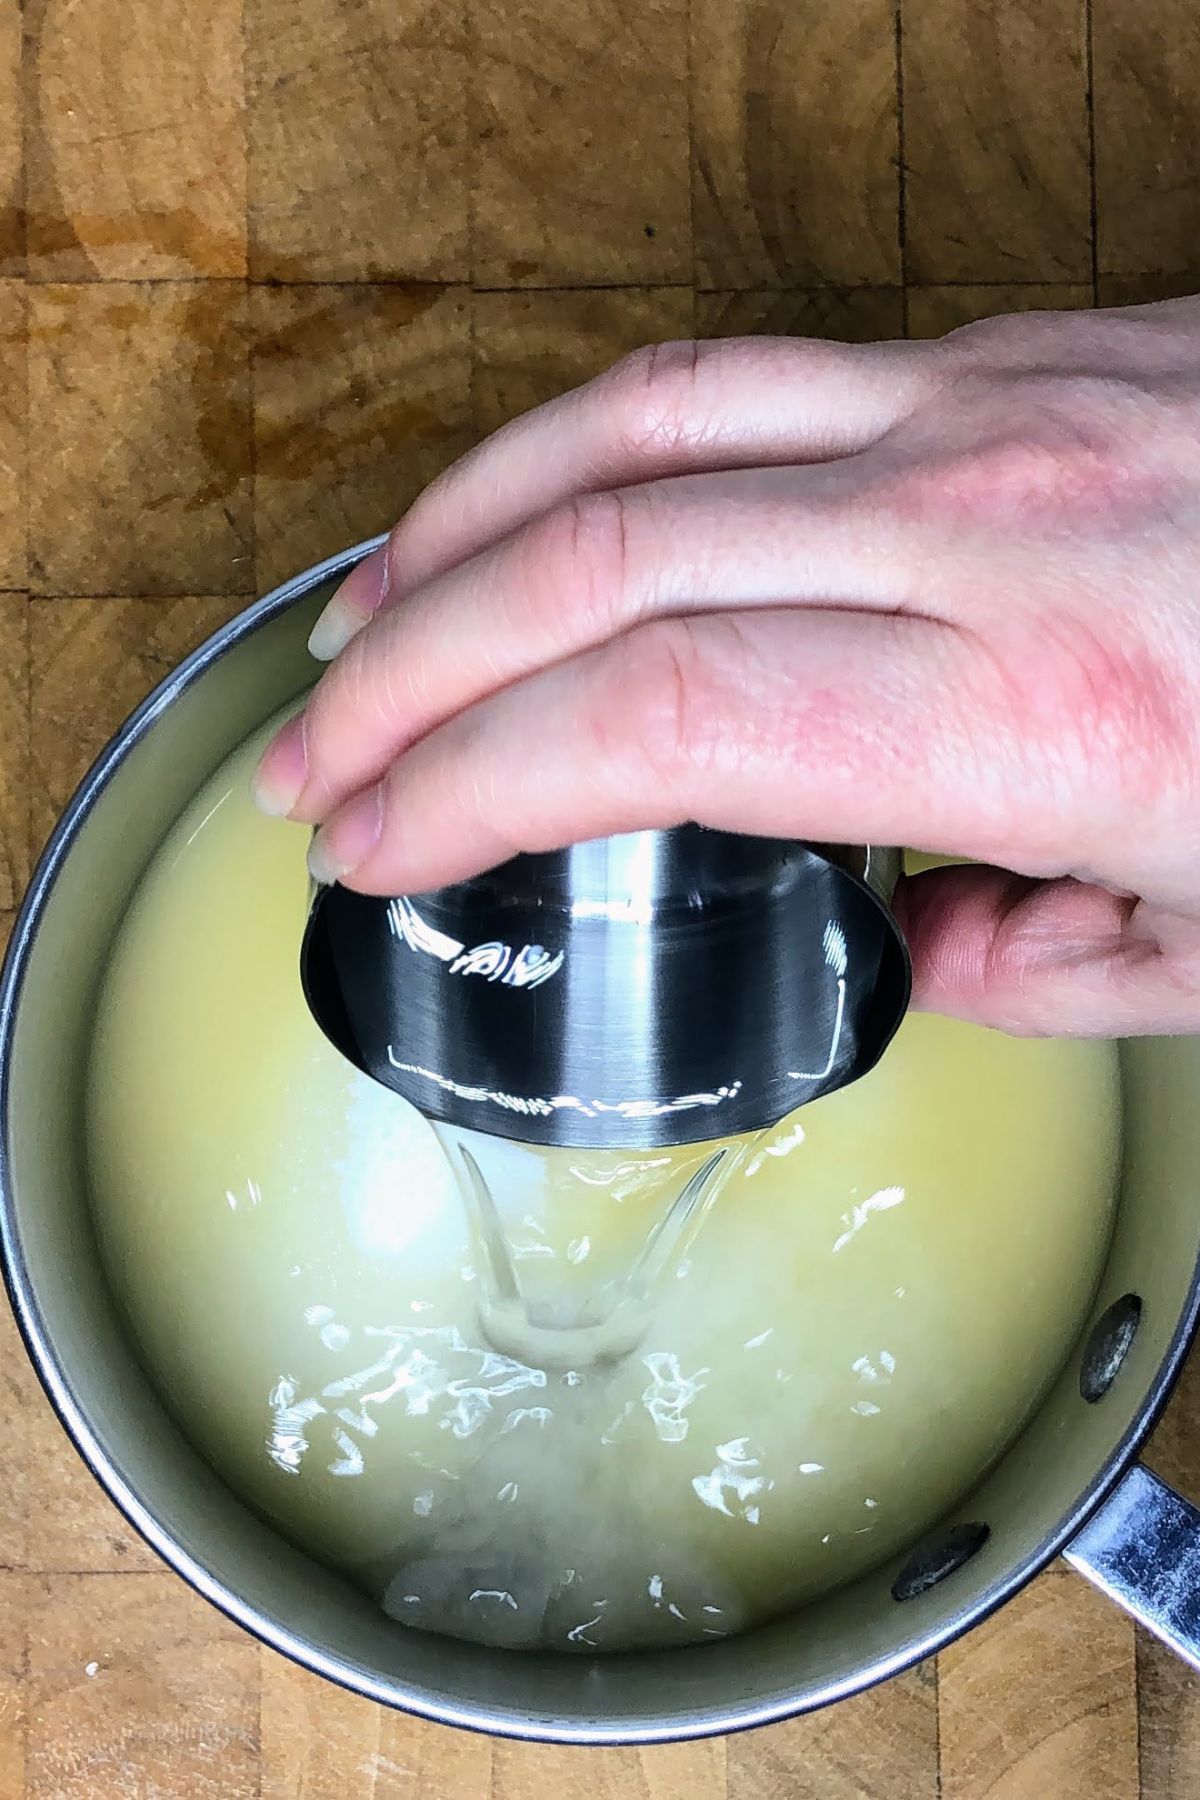 Pouring water into a pot.